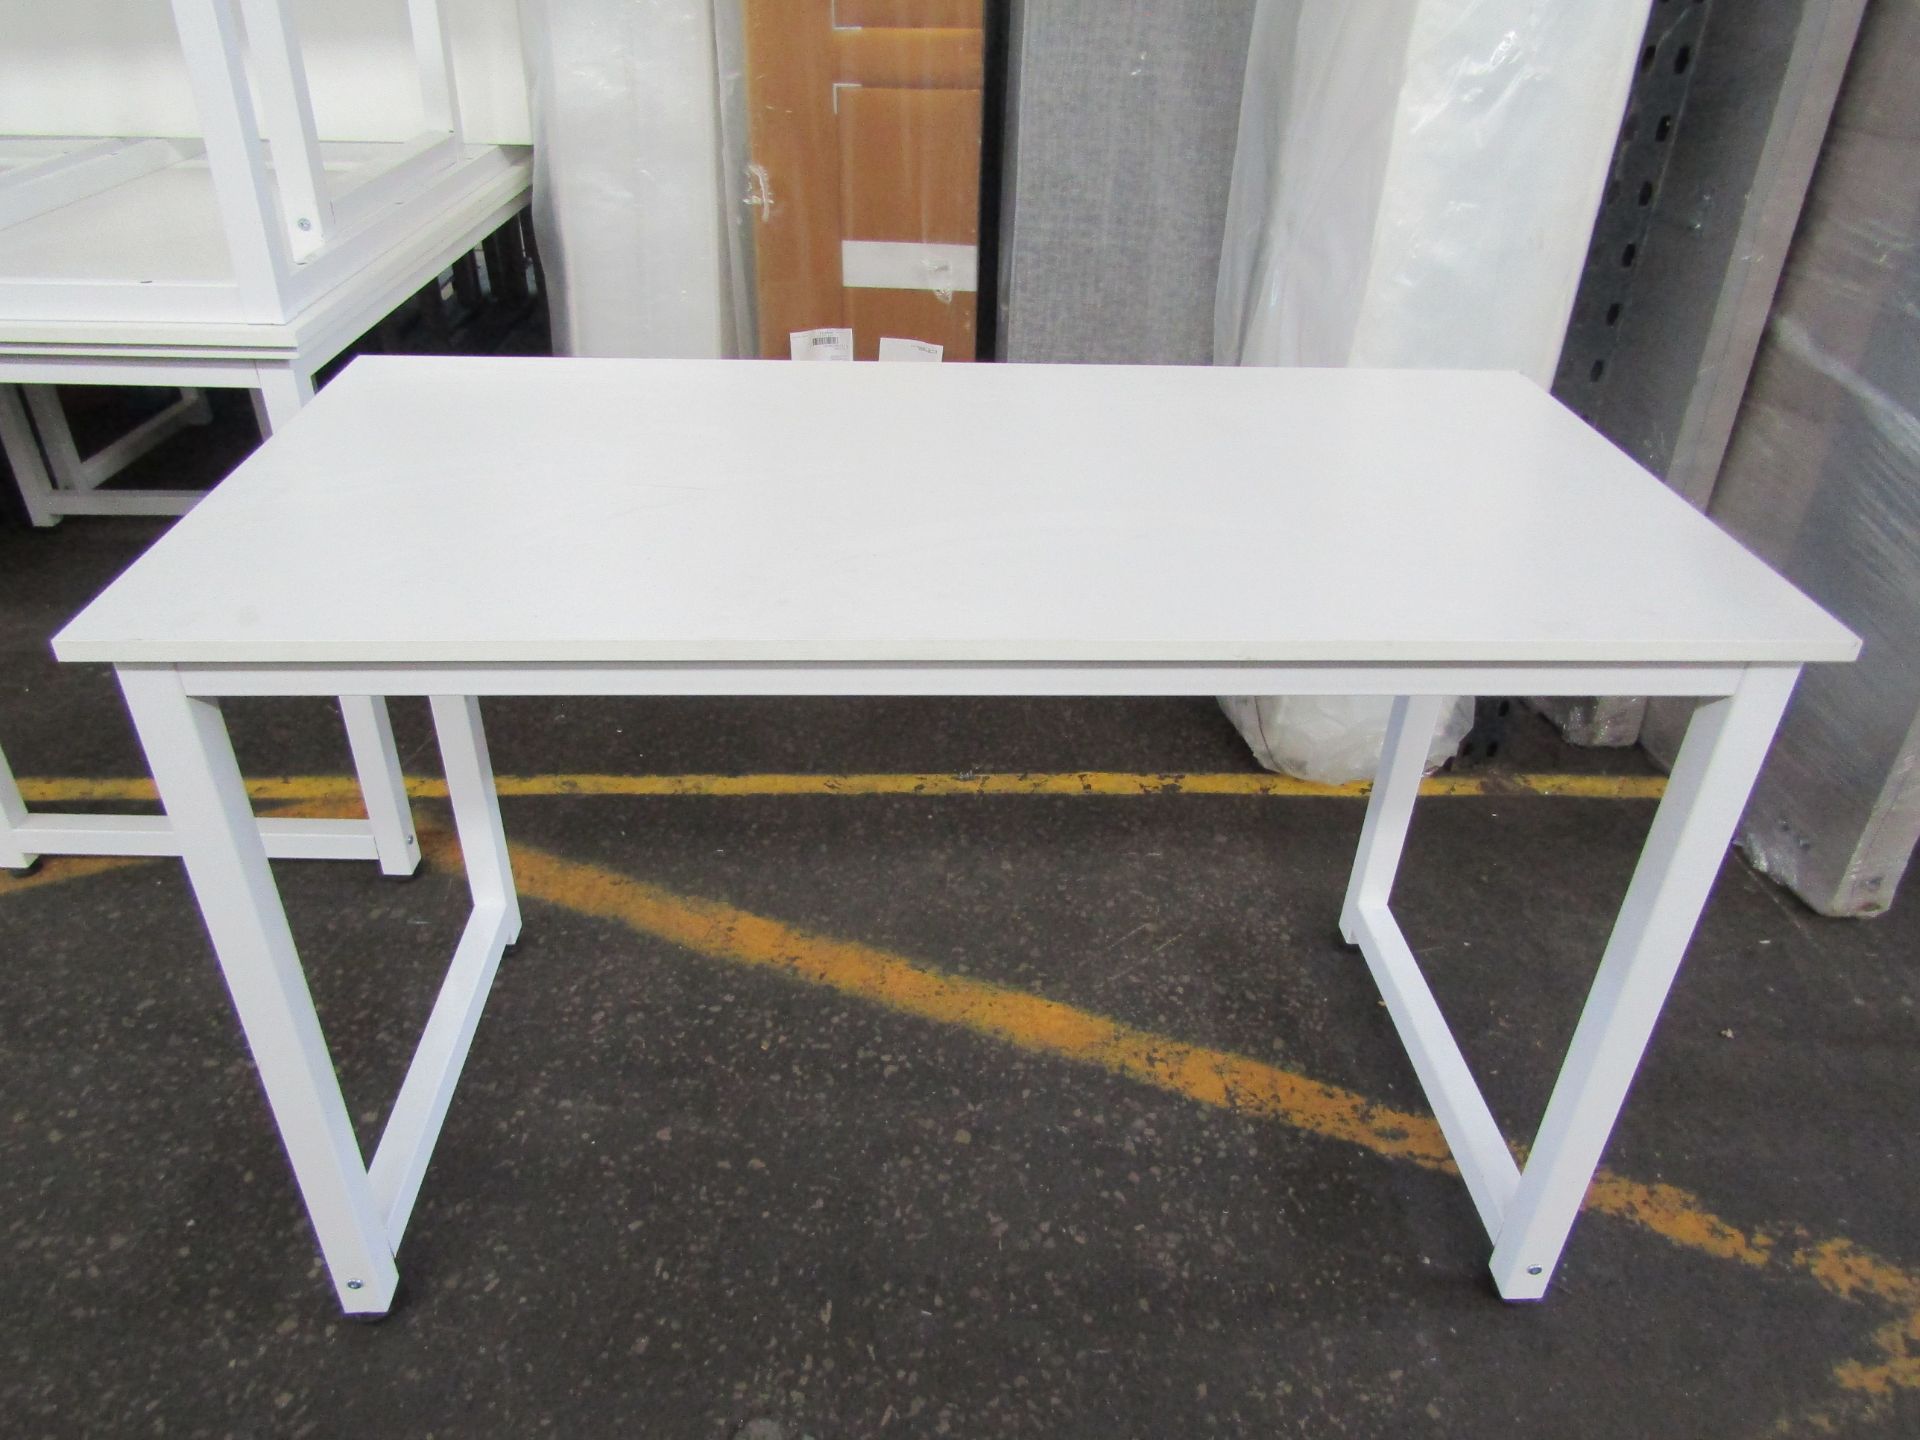 White Wooden Computer Desk With Thick Metal Legs - Fairly Decent Condition However May Contain